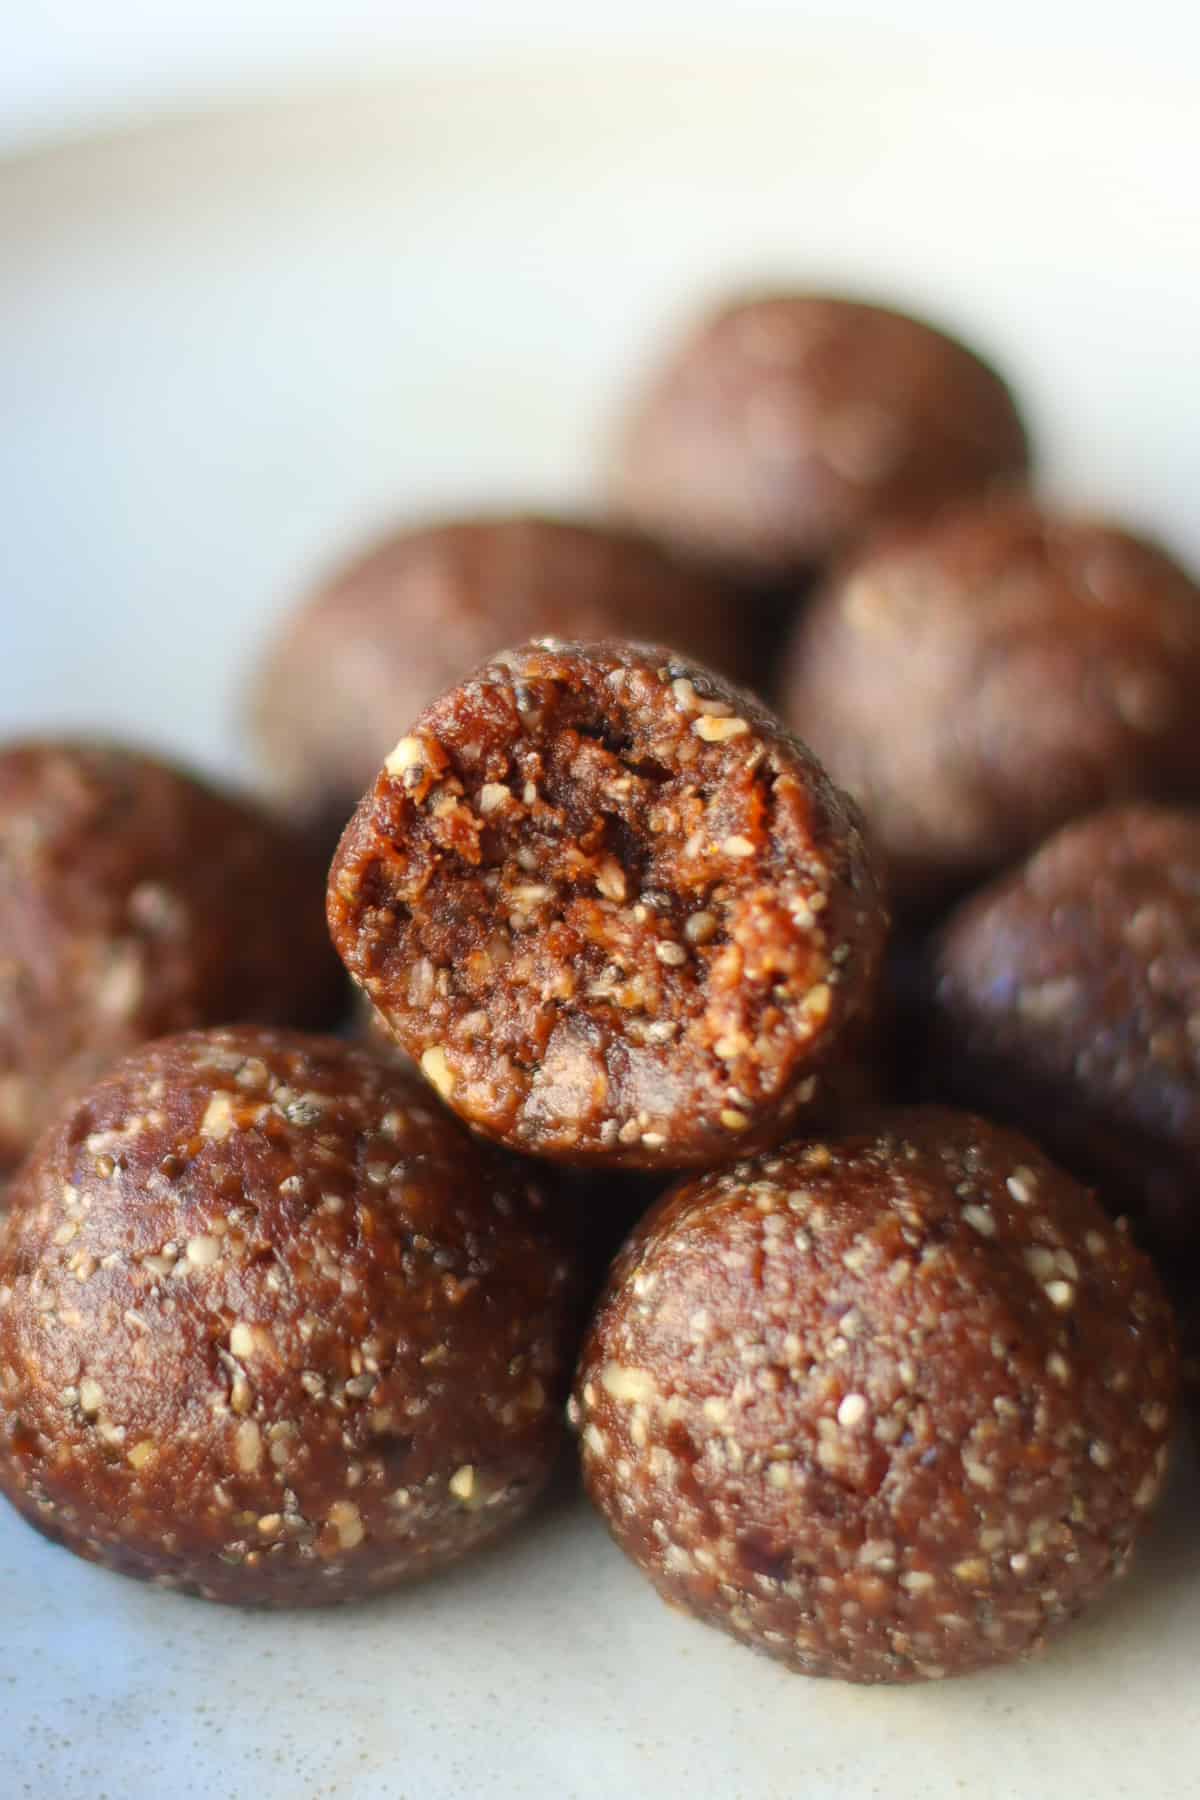 Close-up of stacked chocolate balls with a bite taken out.